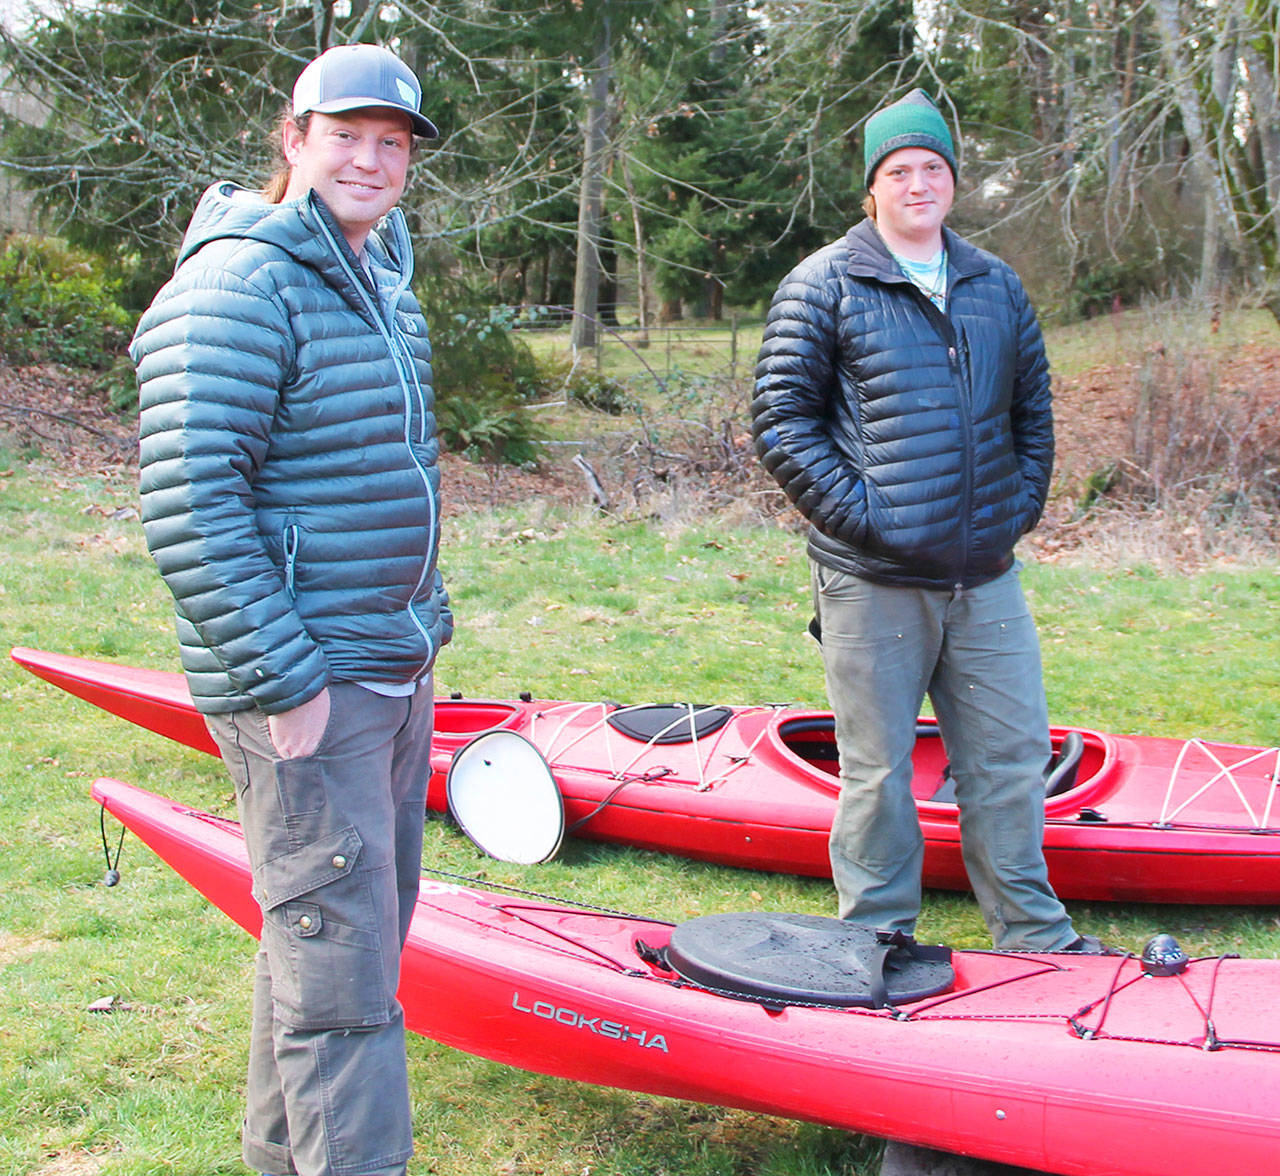 Michael Stone, left, and Conner Herrington, right, will set off for Alaska this week. (Susan Riemer/Staff Photo)